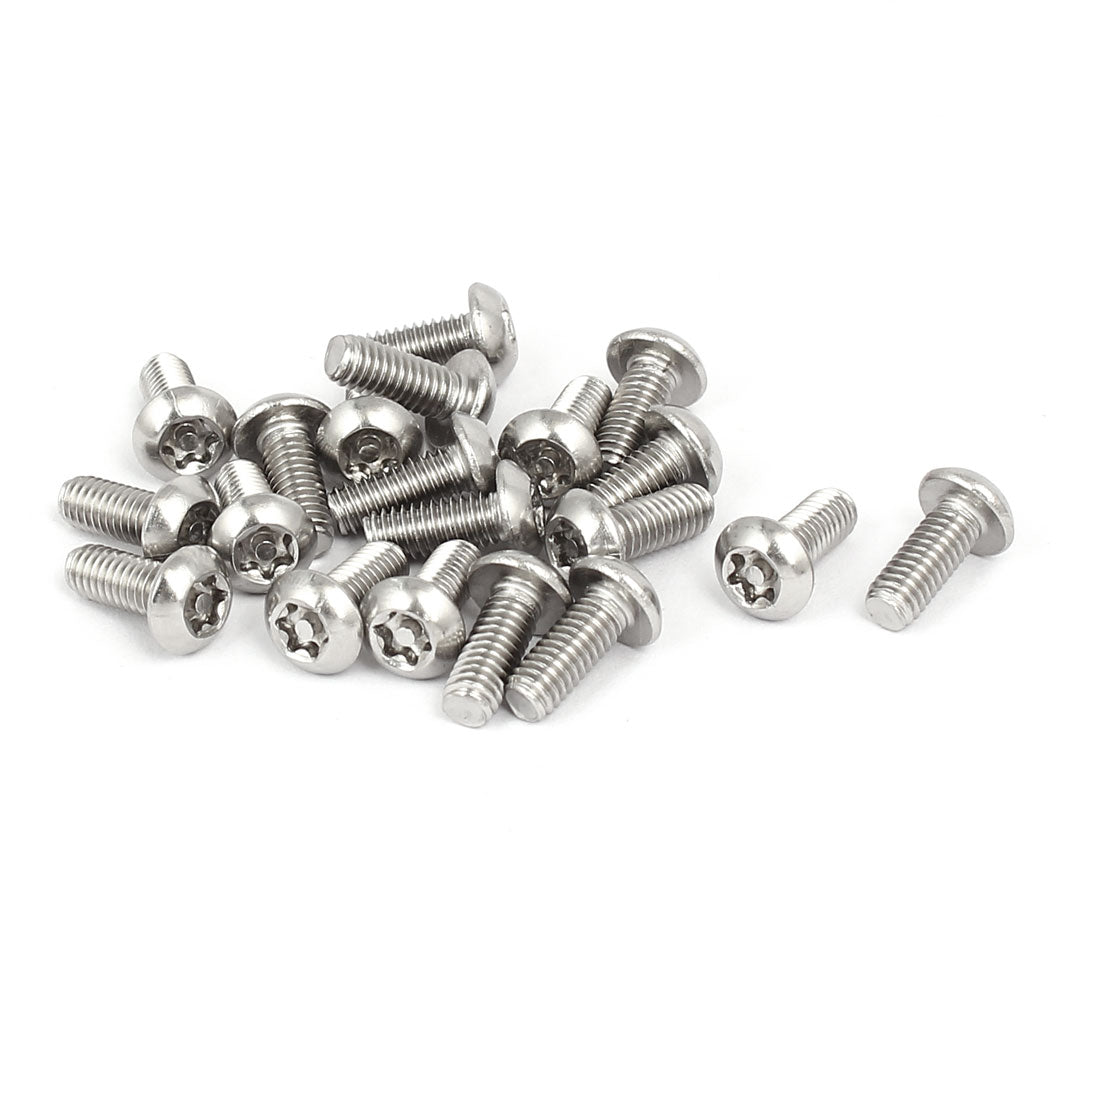 uxcell Uxcell M4x10mm 304 Stainless Steel Button Head Torx Tamper Resistant Screws 20pcs